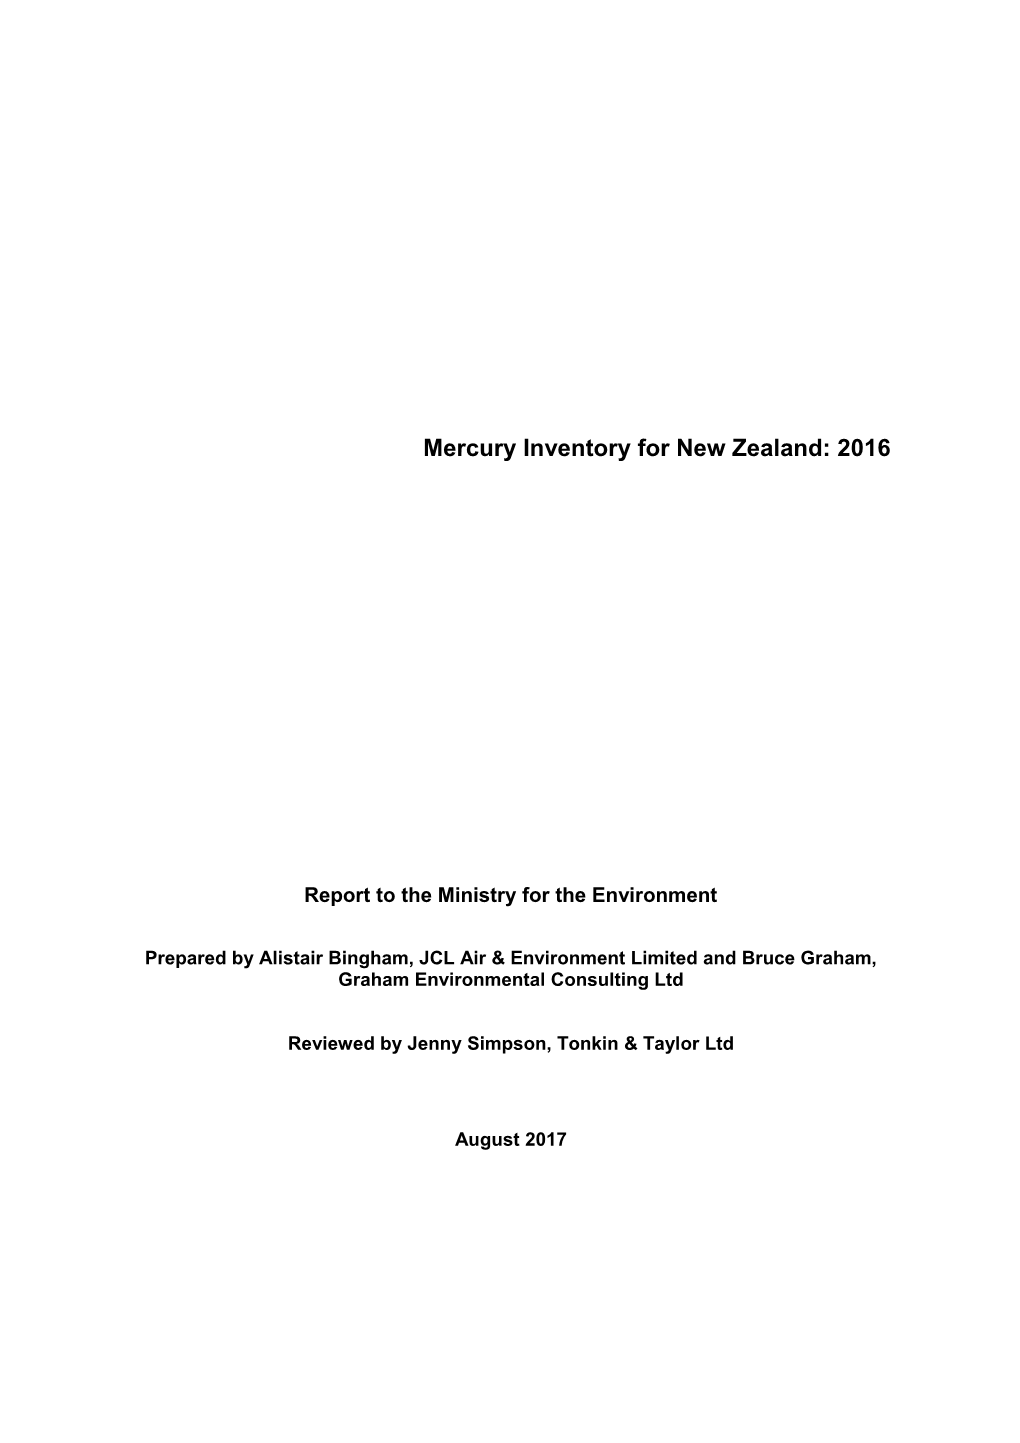 Report to the Ministry for the Environment